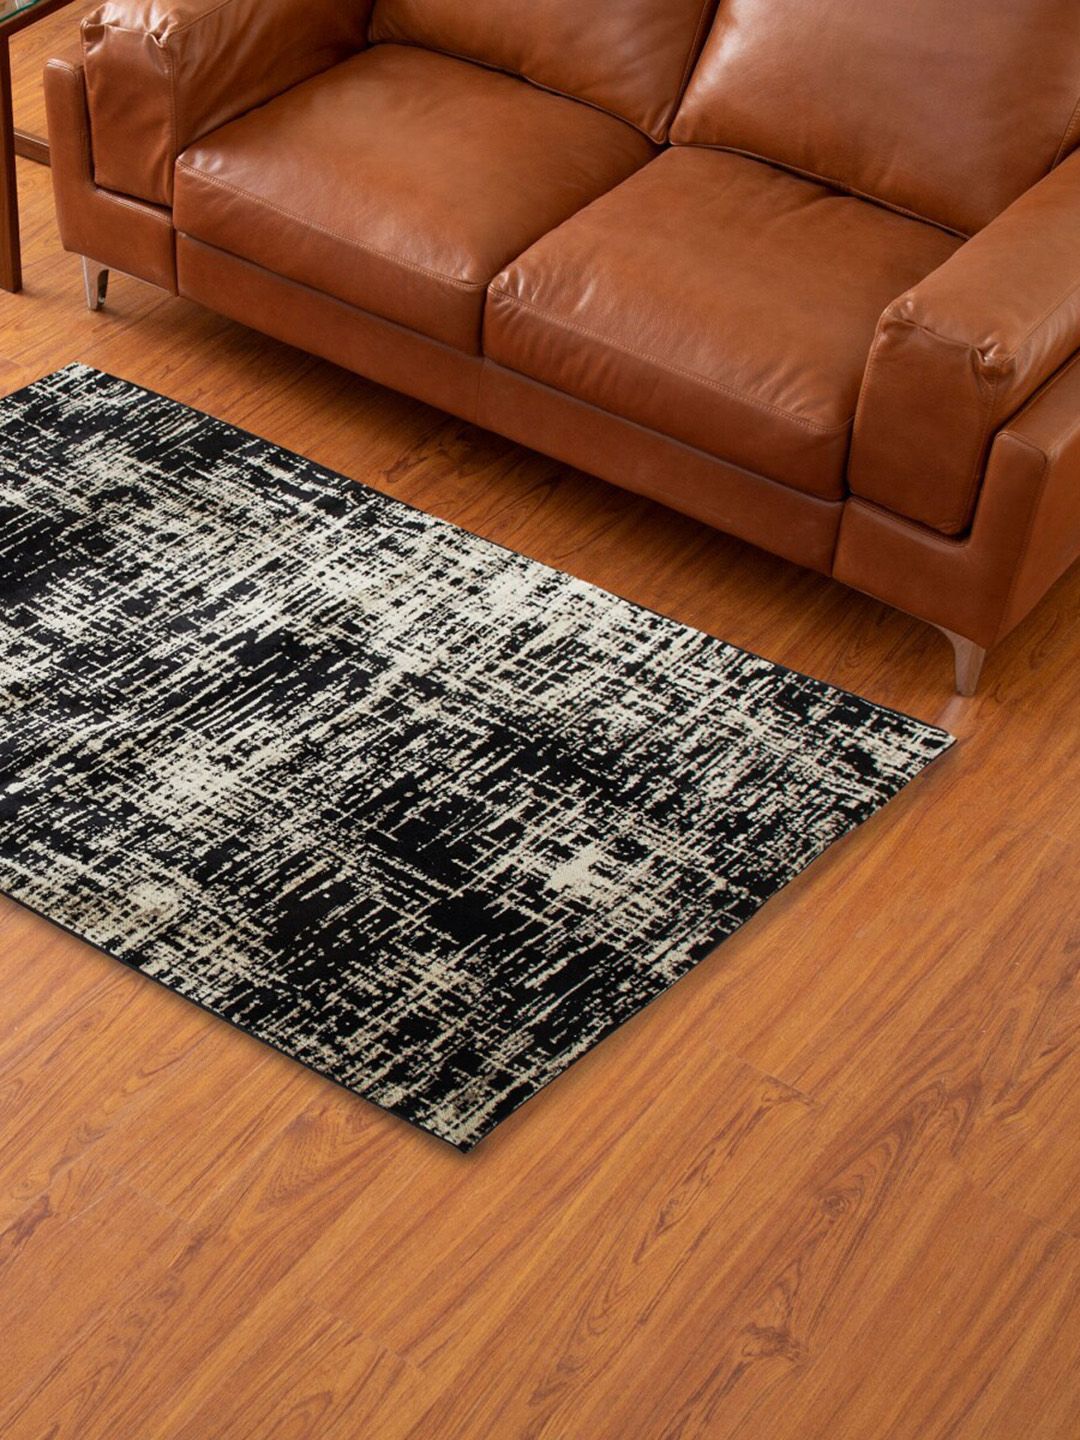 Home Centre Unisex Black & White Floral Printed Woven Anti-Skid Carpet Price in India